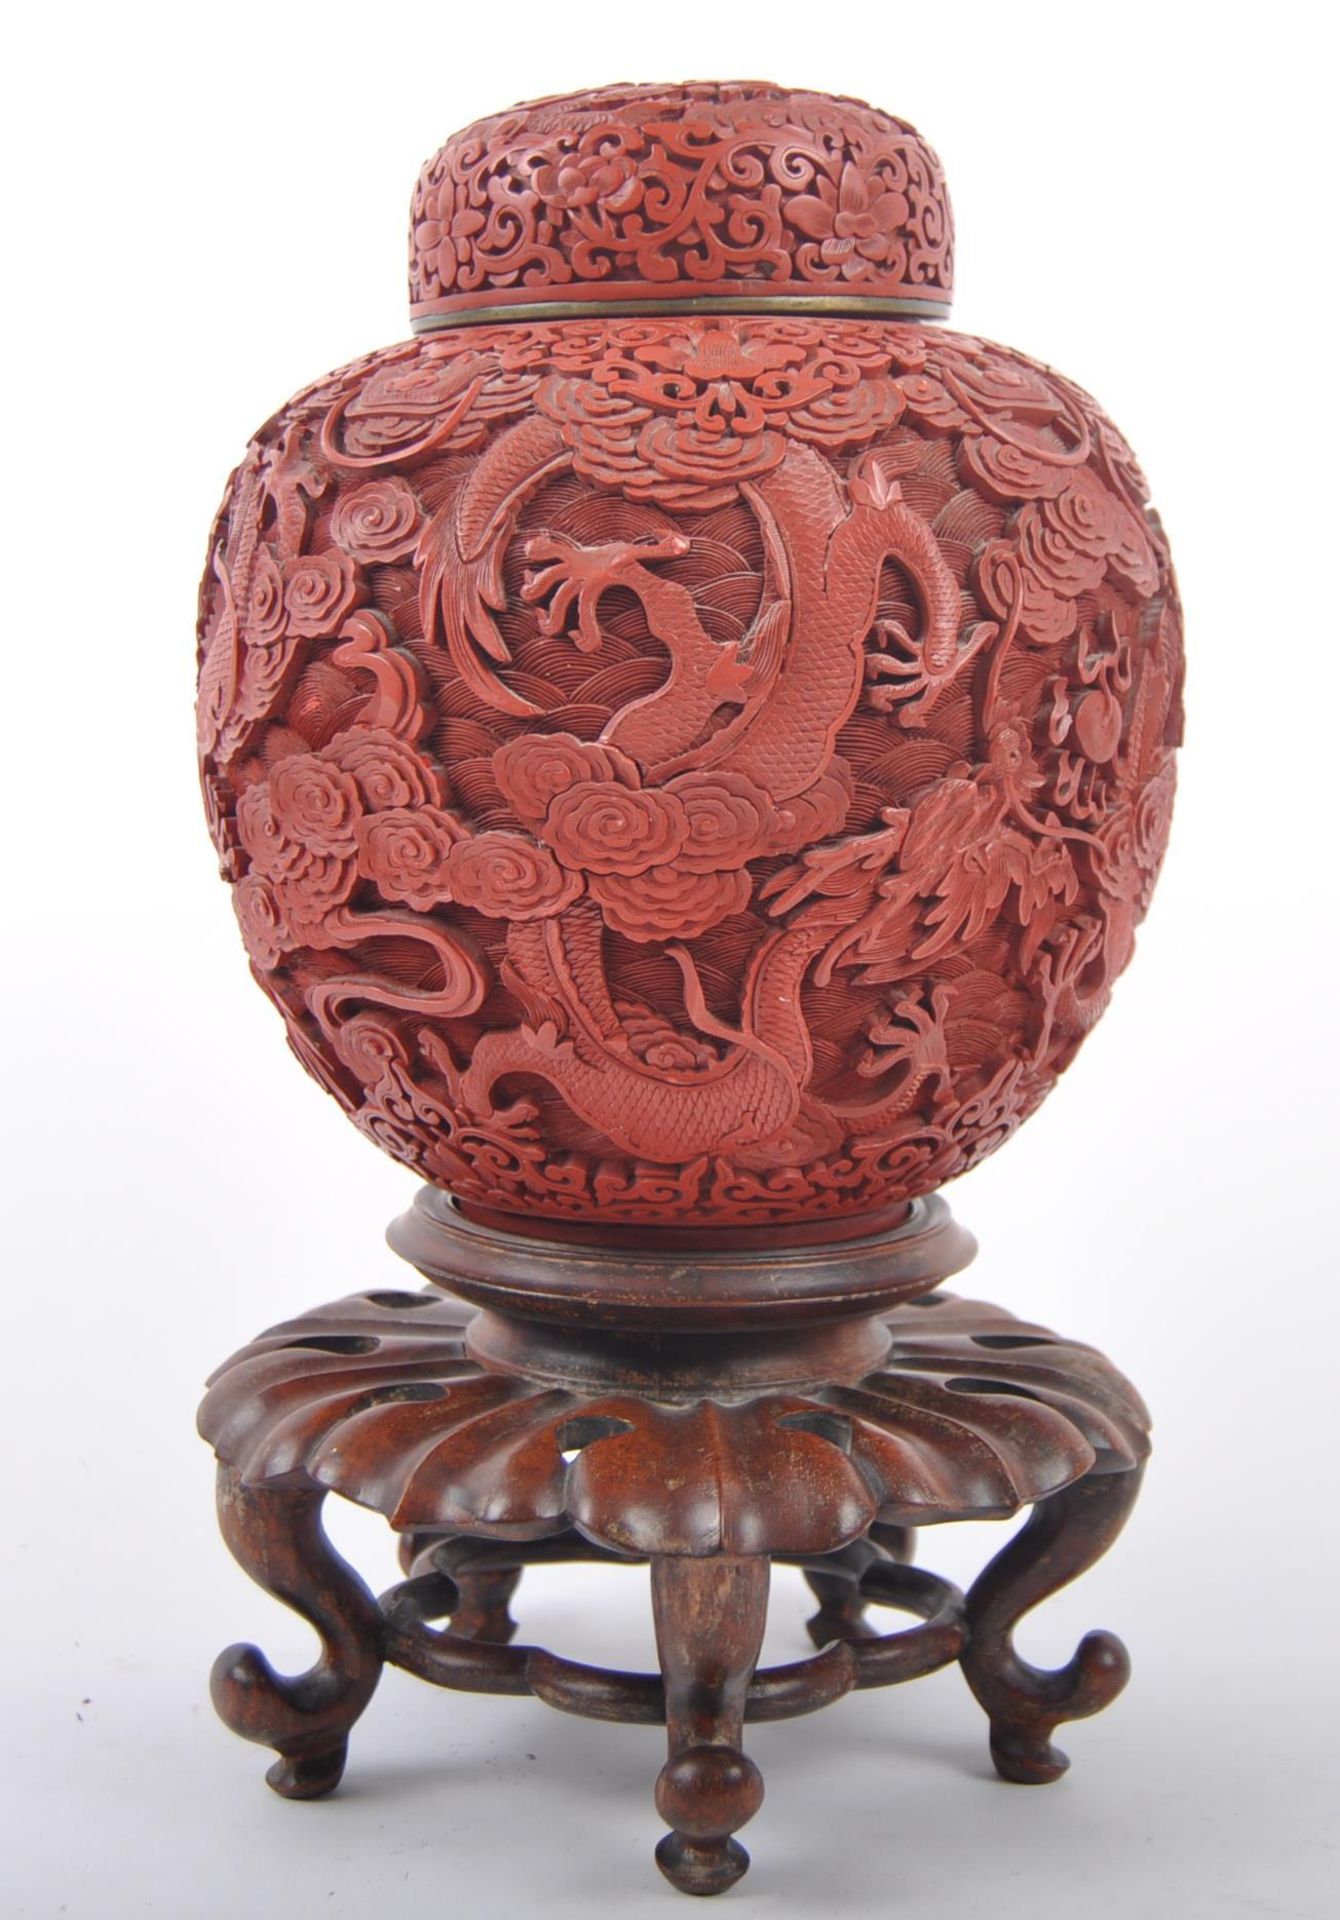 LARGE CINNABAR LACQUER GINGER JAR ON STAND - Image 3 of 8